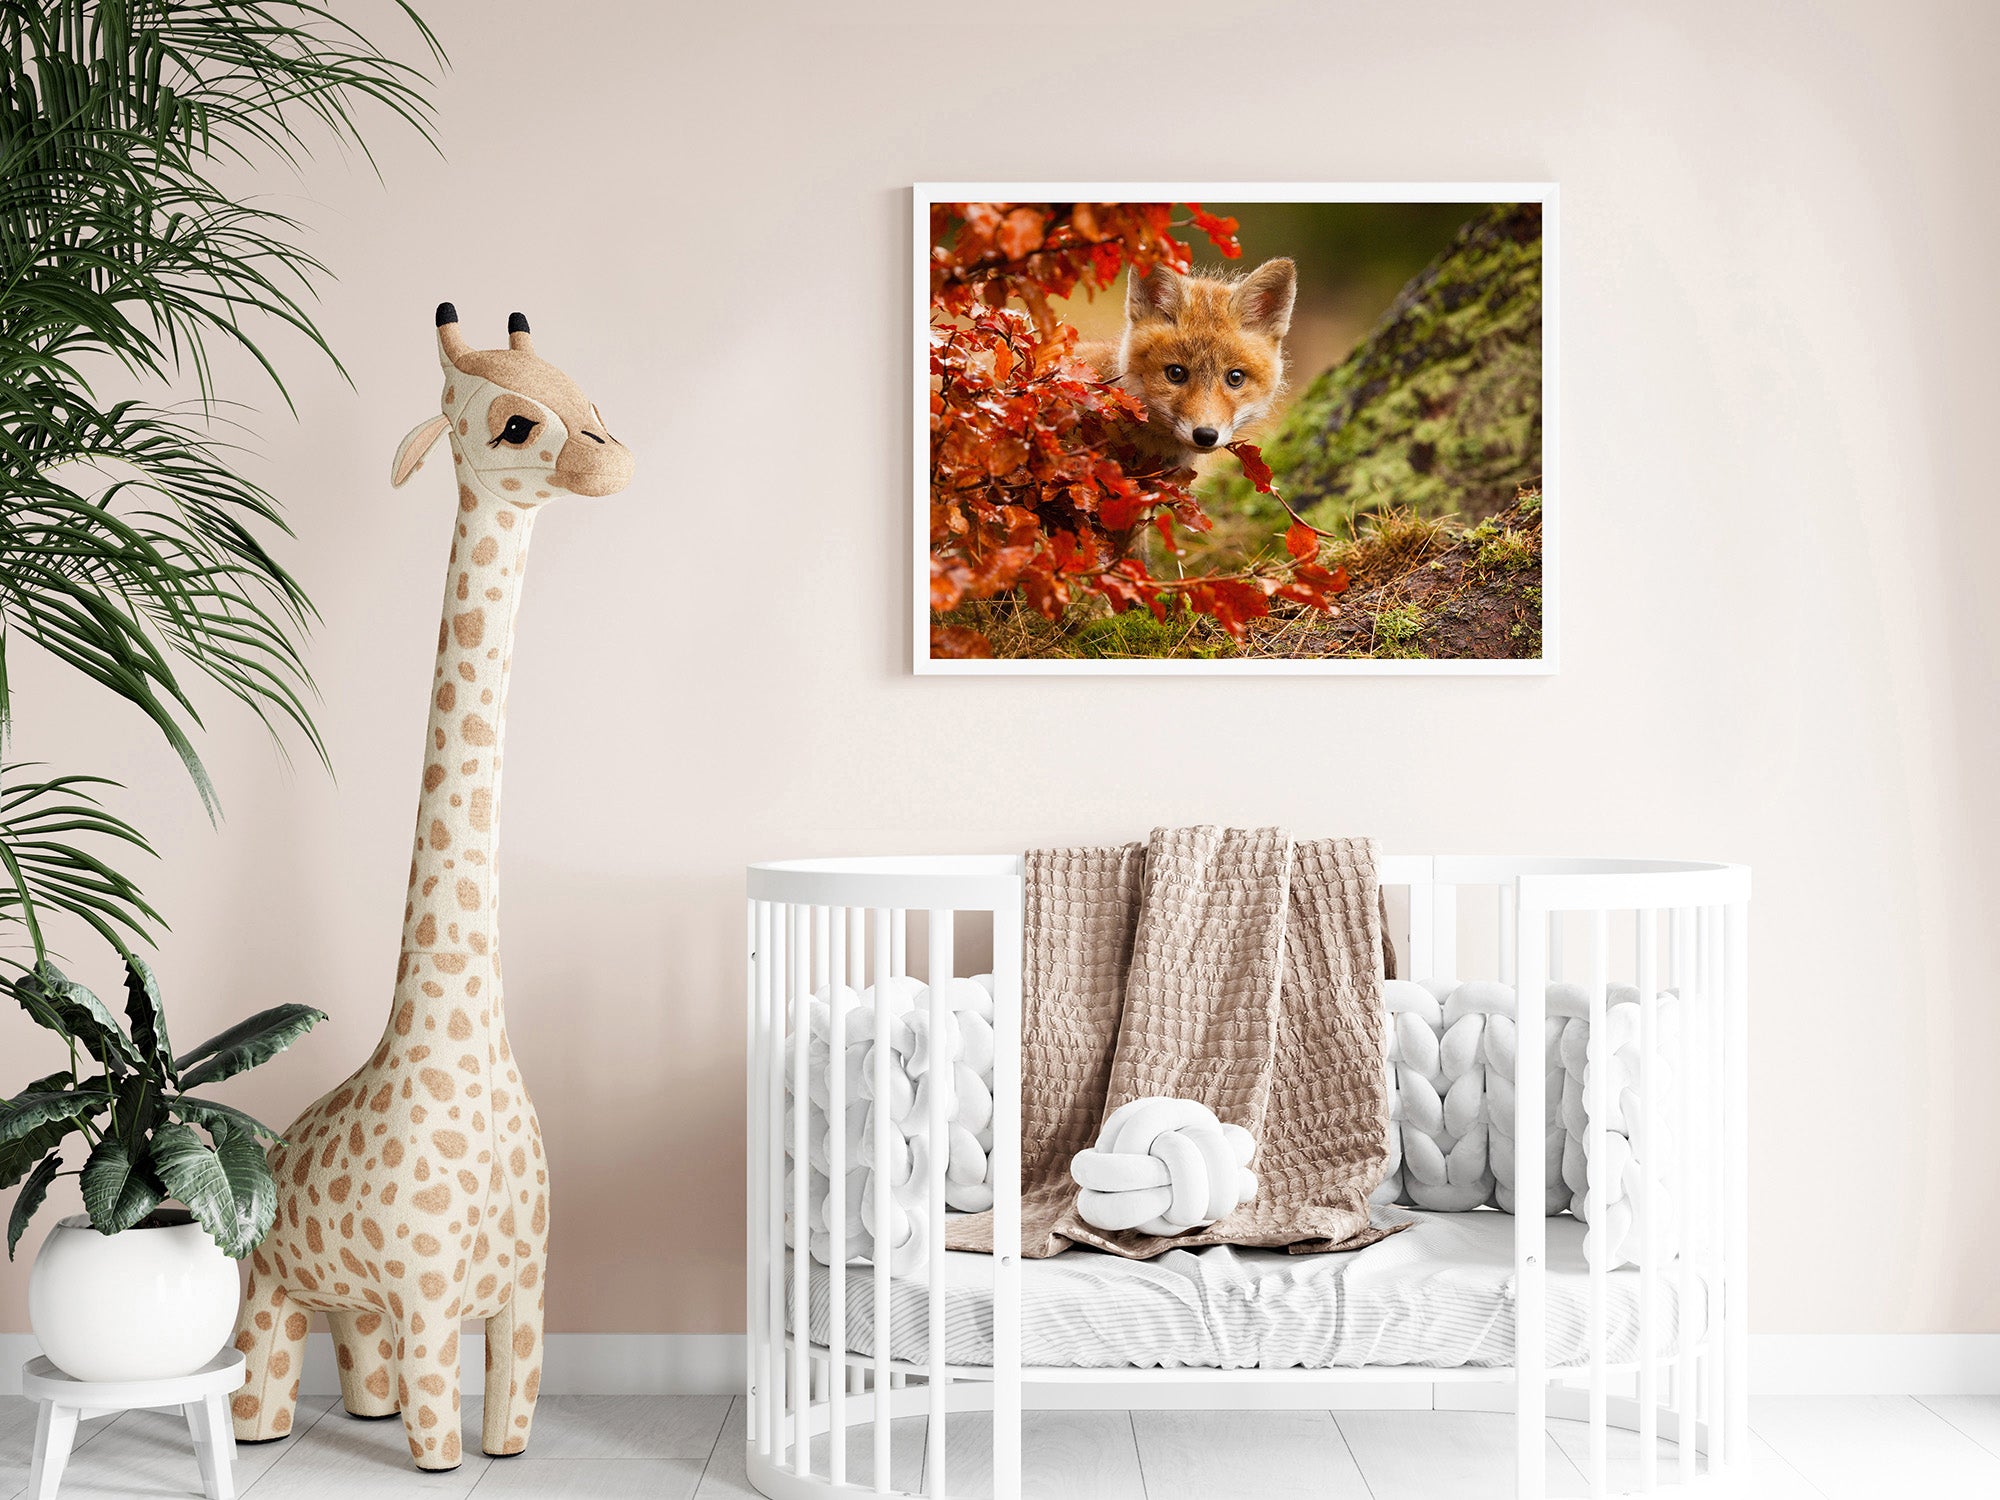 Nursery Room Wall Decor: Wall Art Prints for the Home and Workplace